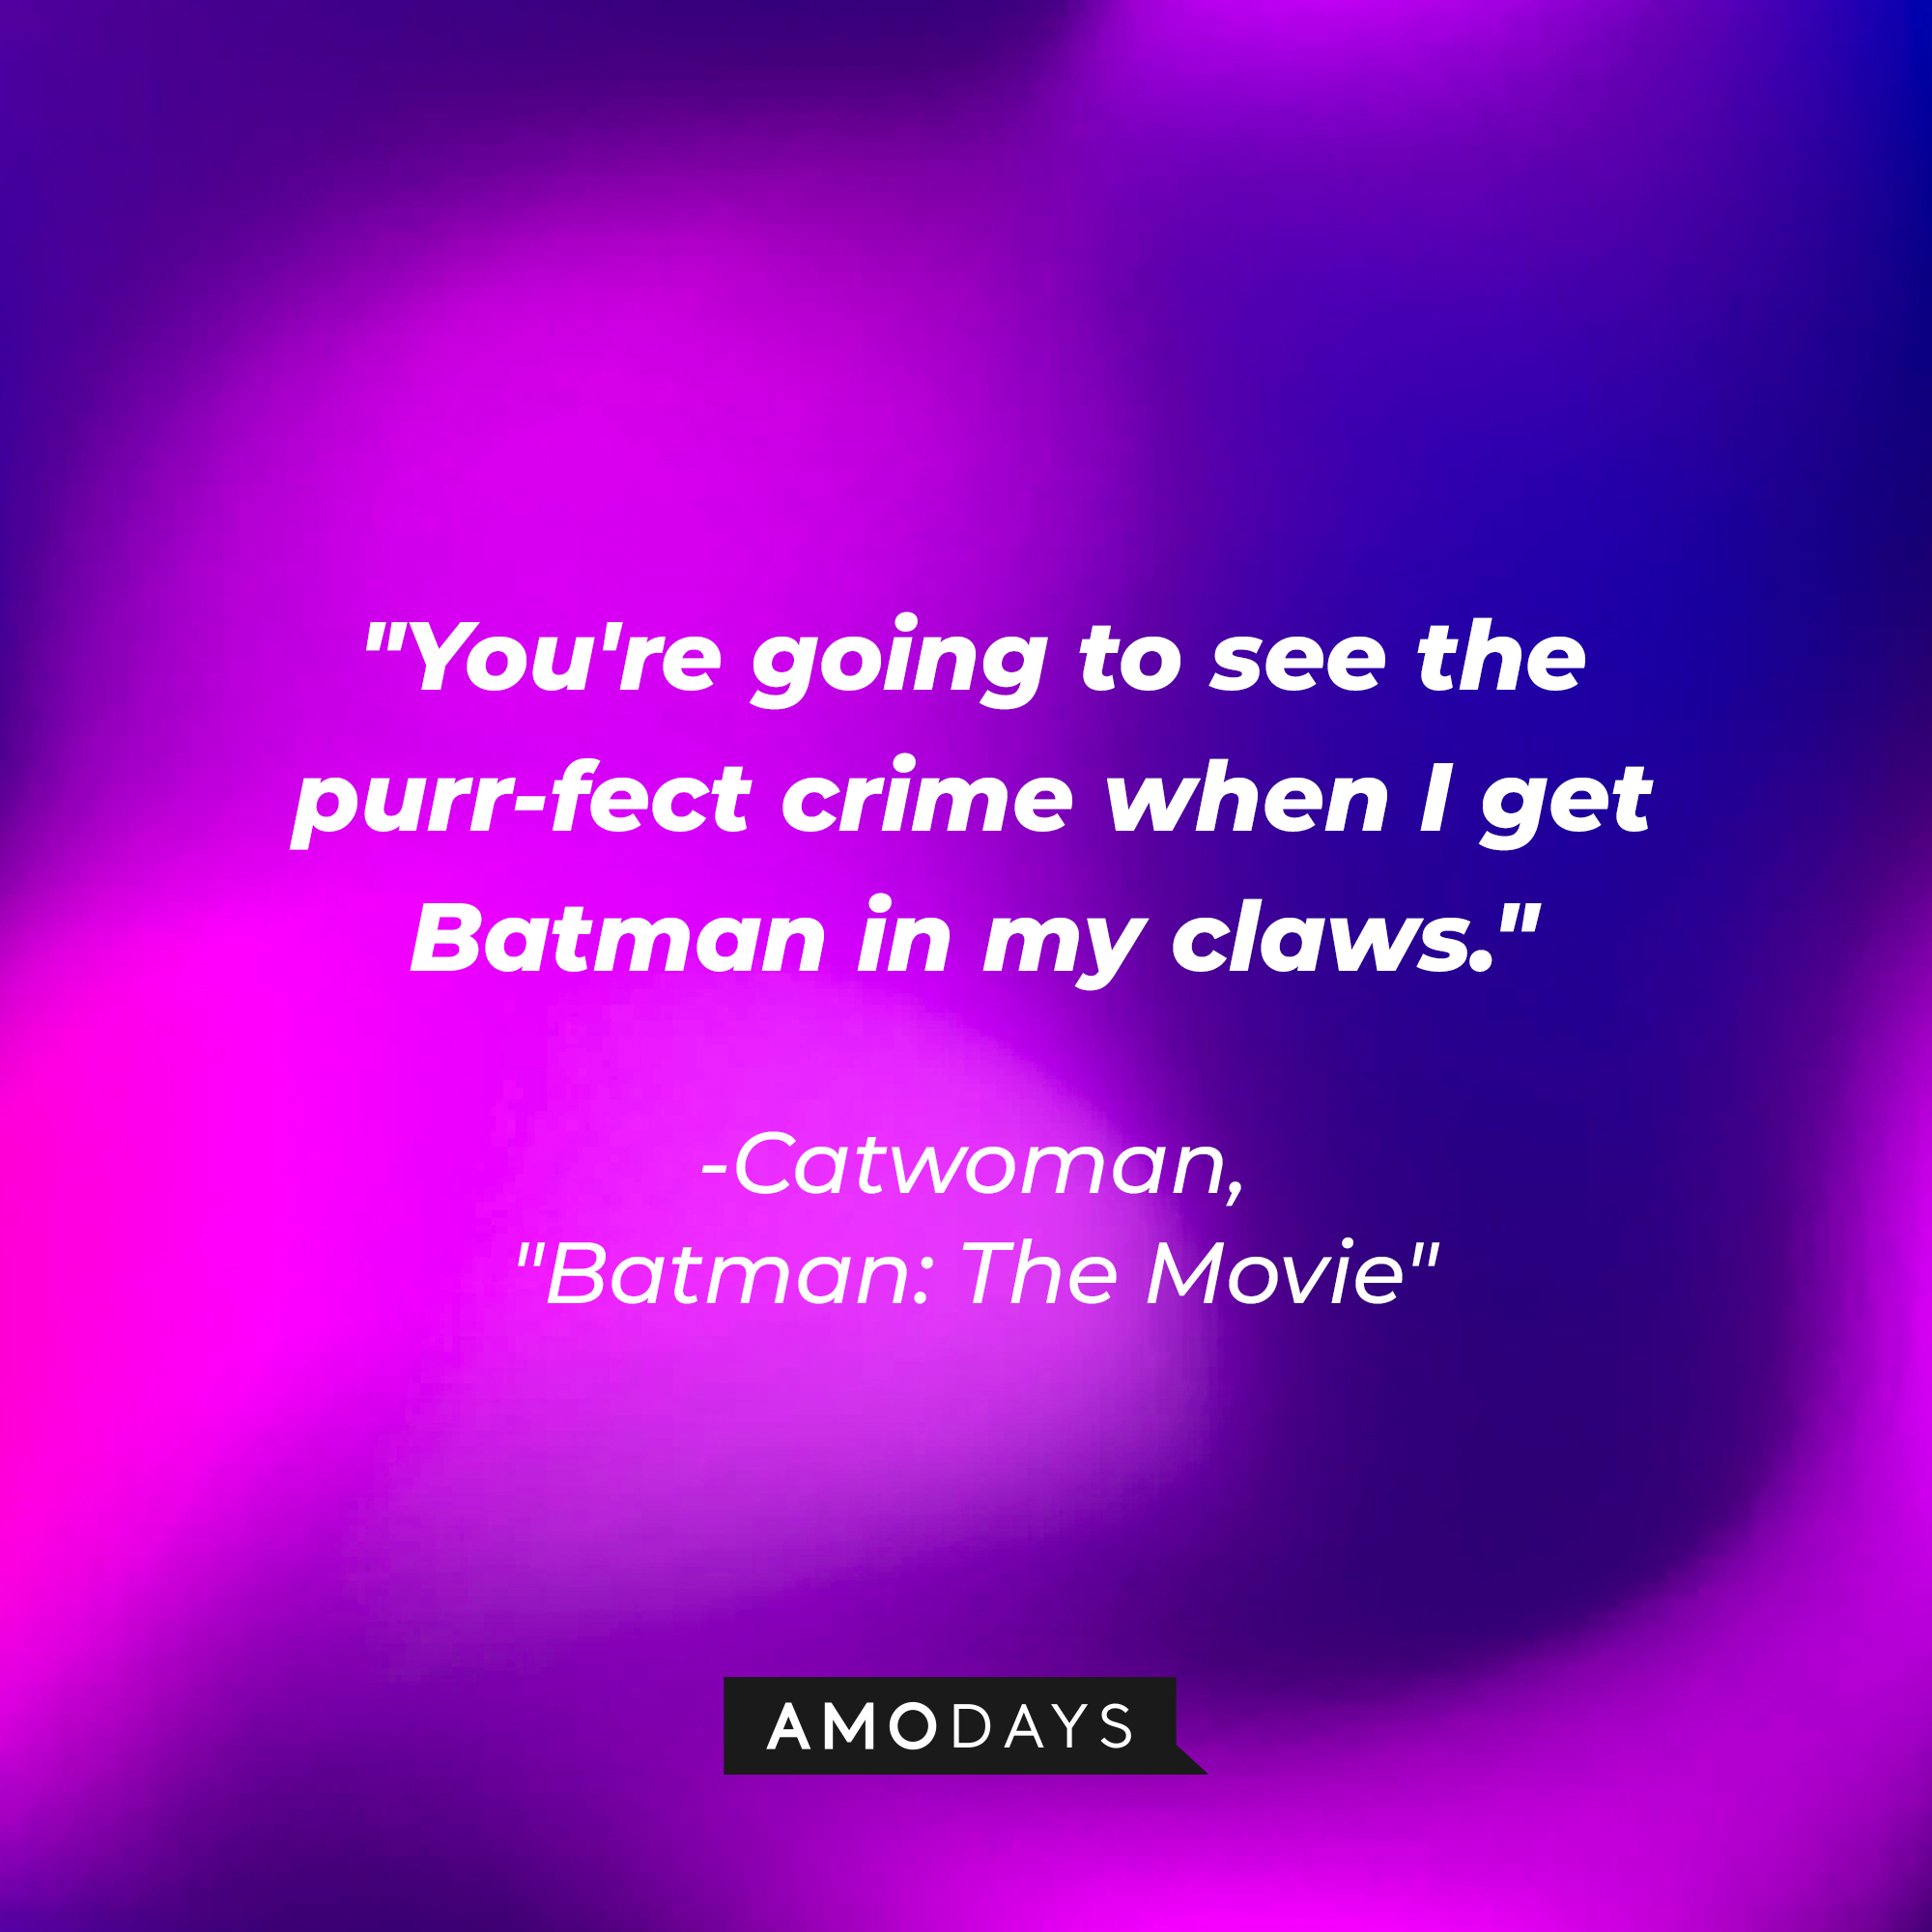 Catwoman’s quote: "You're going to see the purr-fect crime when I get Batman in my claws." | Image: AmoDays